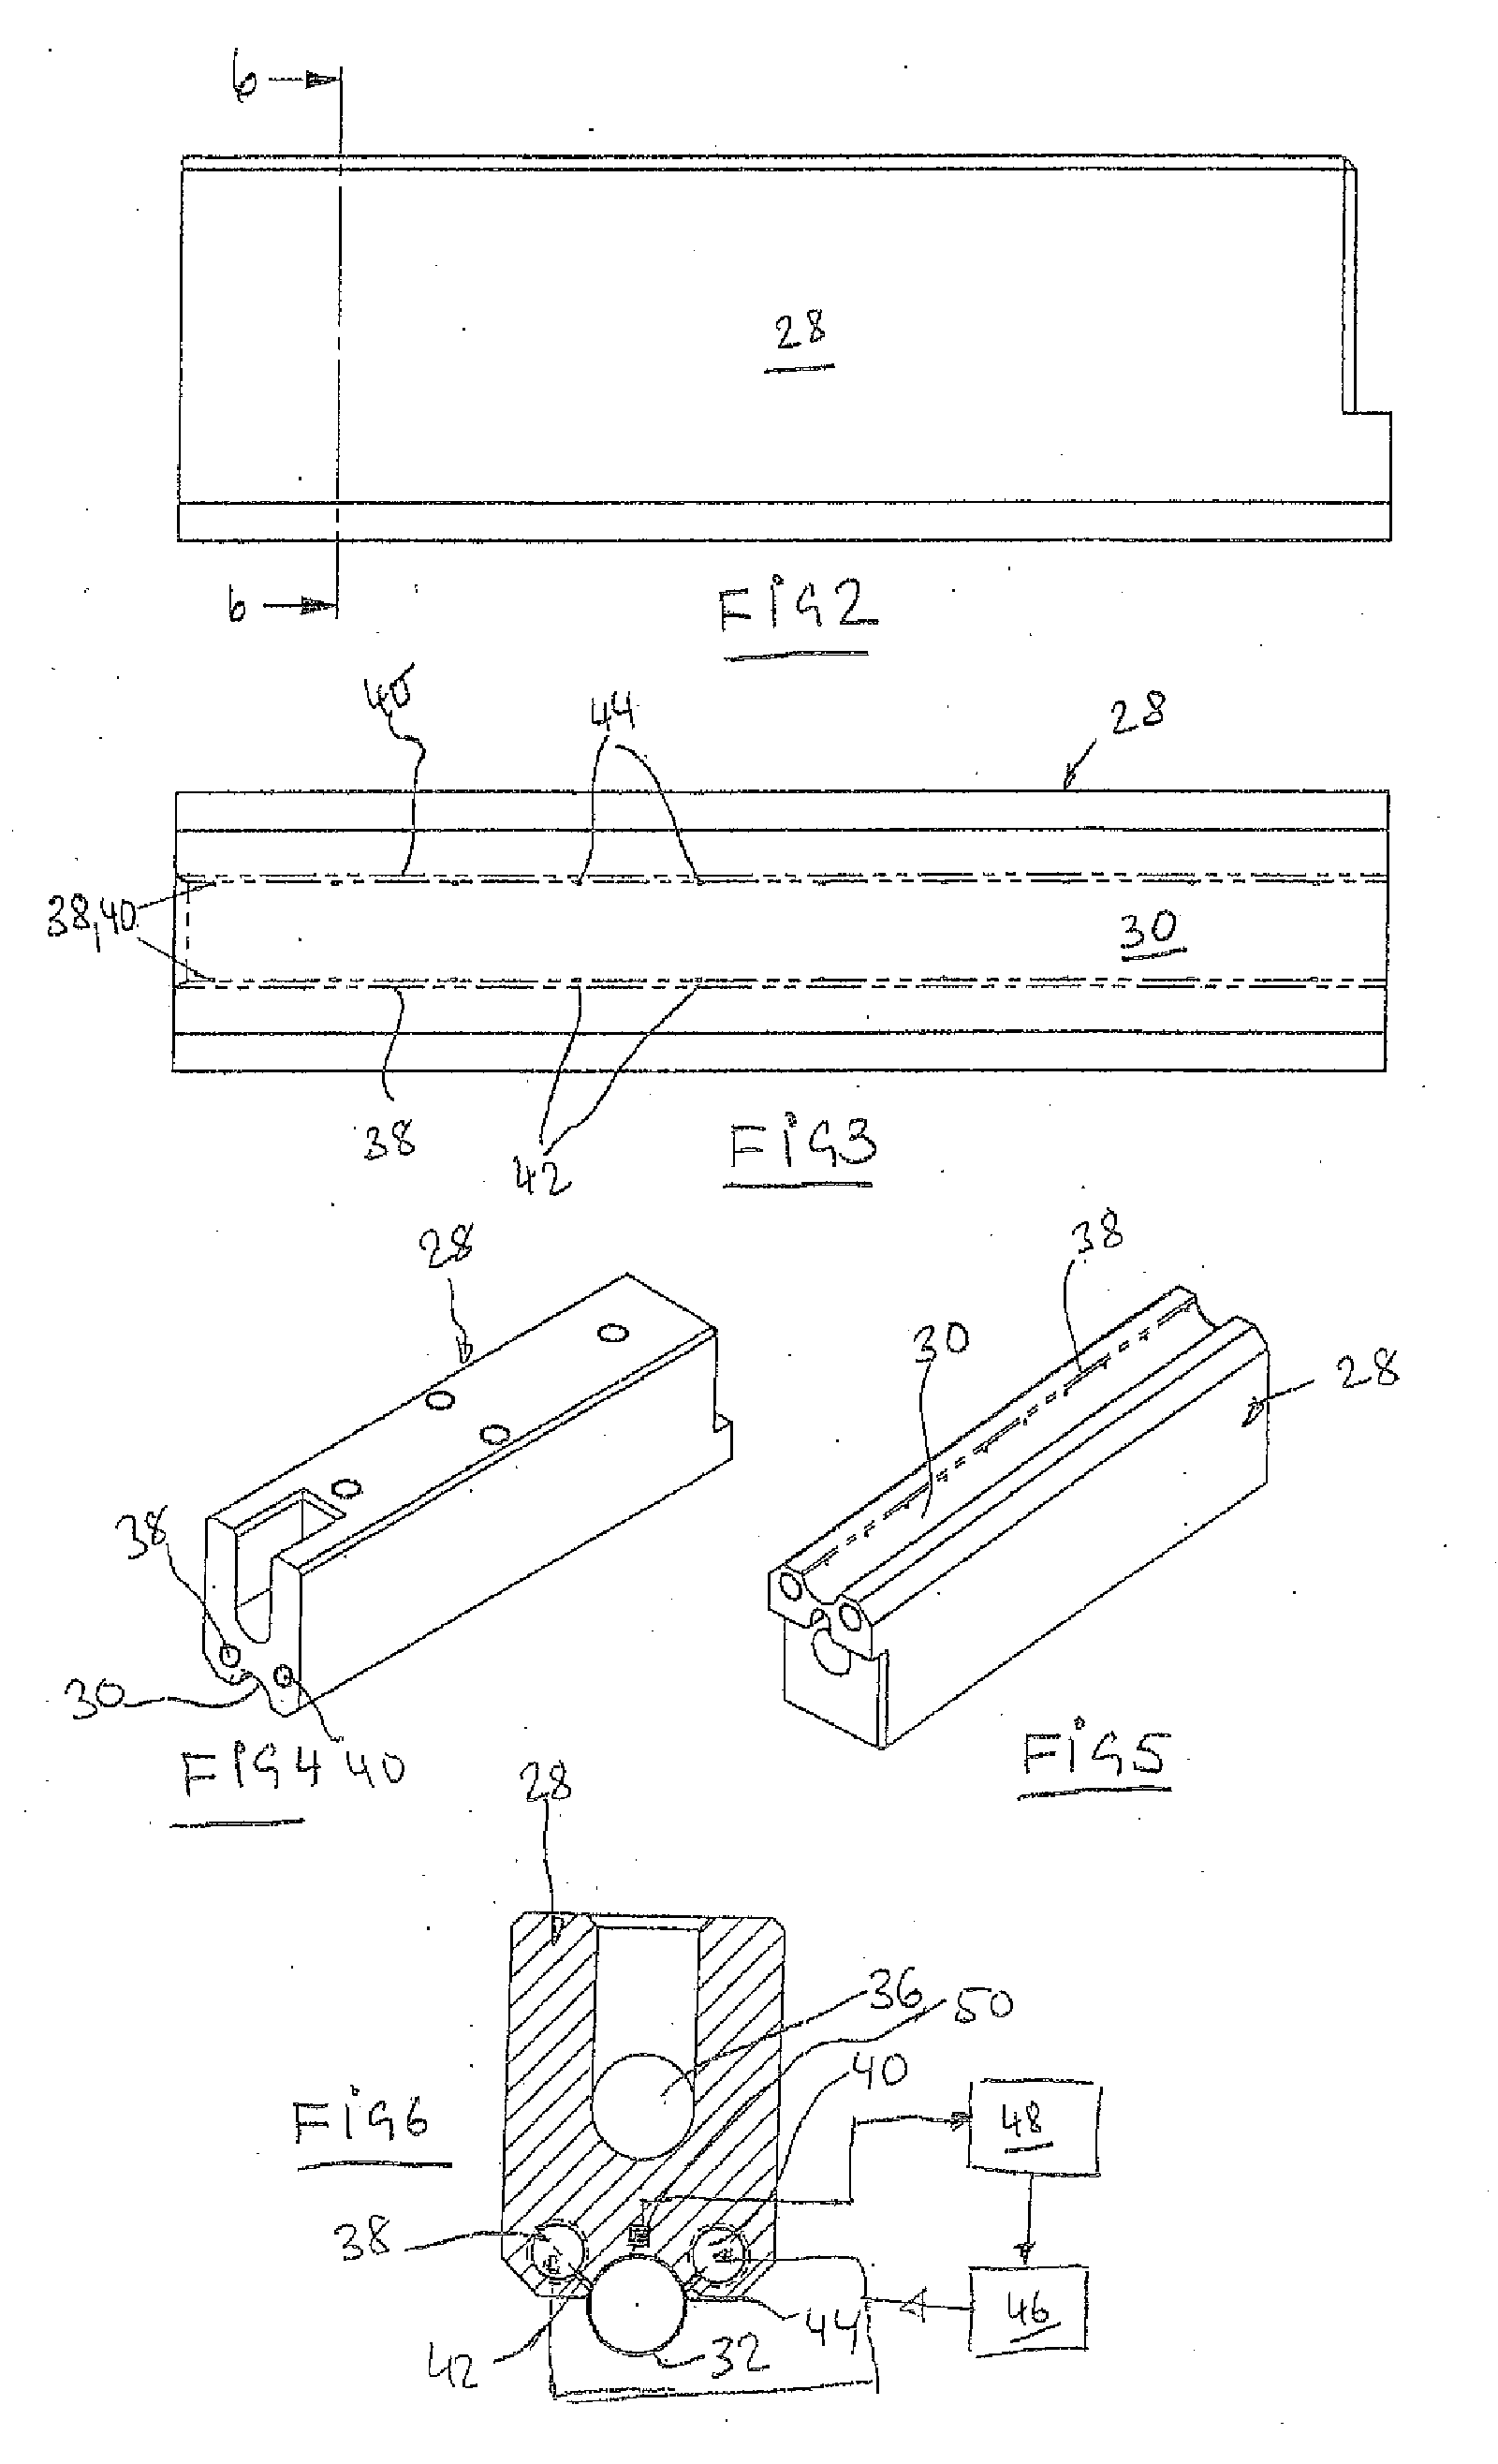 Apparatus for Glueing Together the Wrap of An Endless Tow of Filter Material